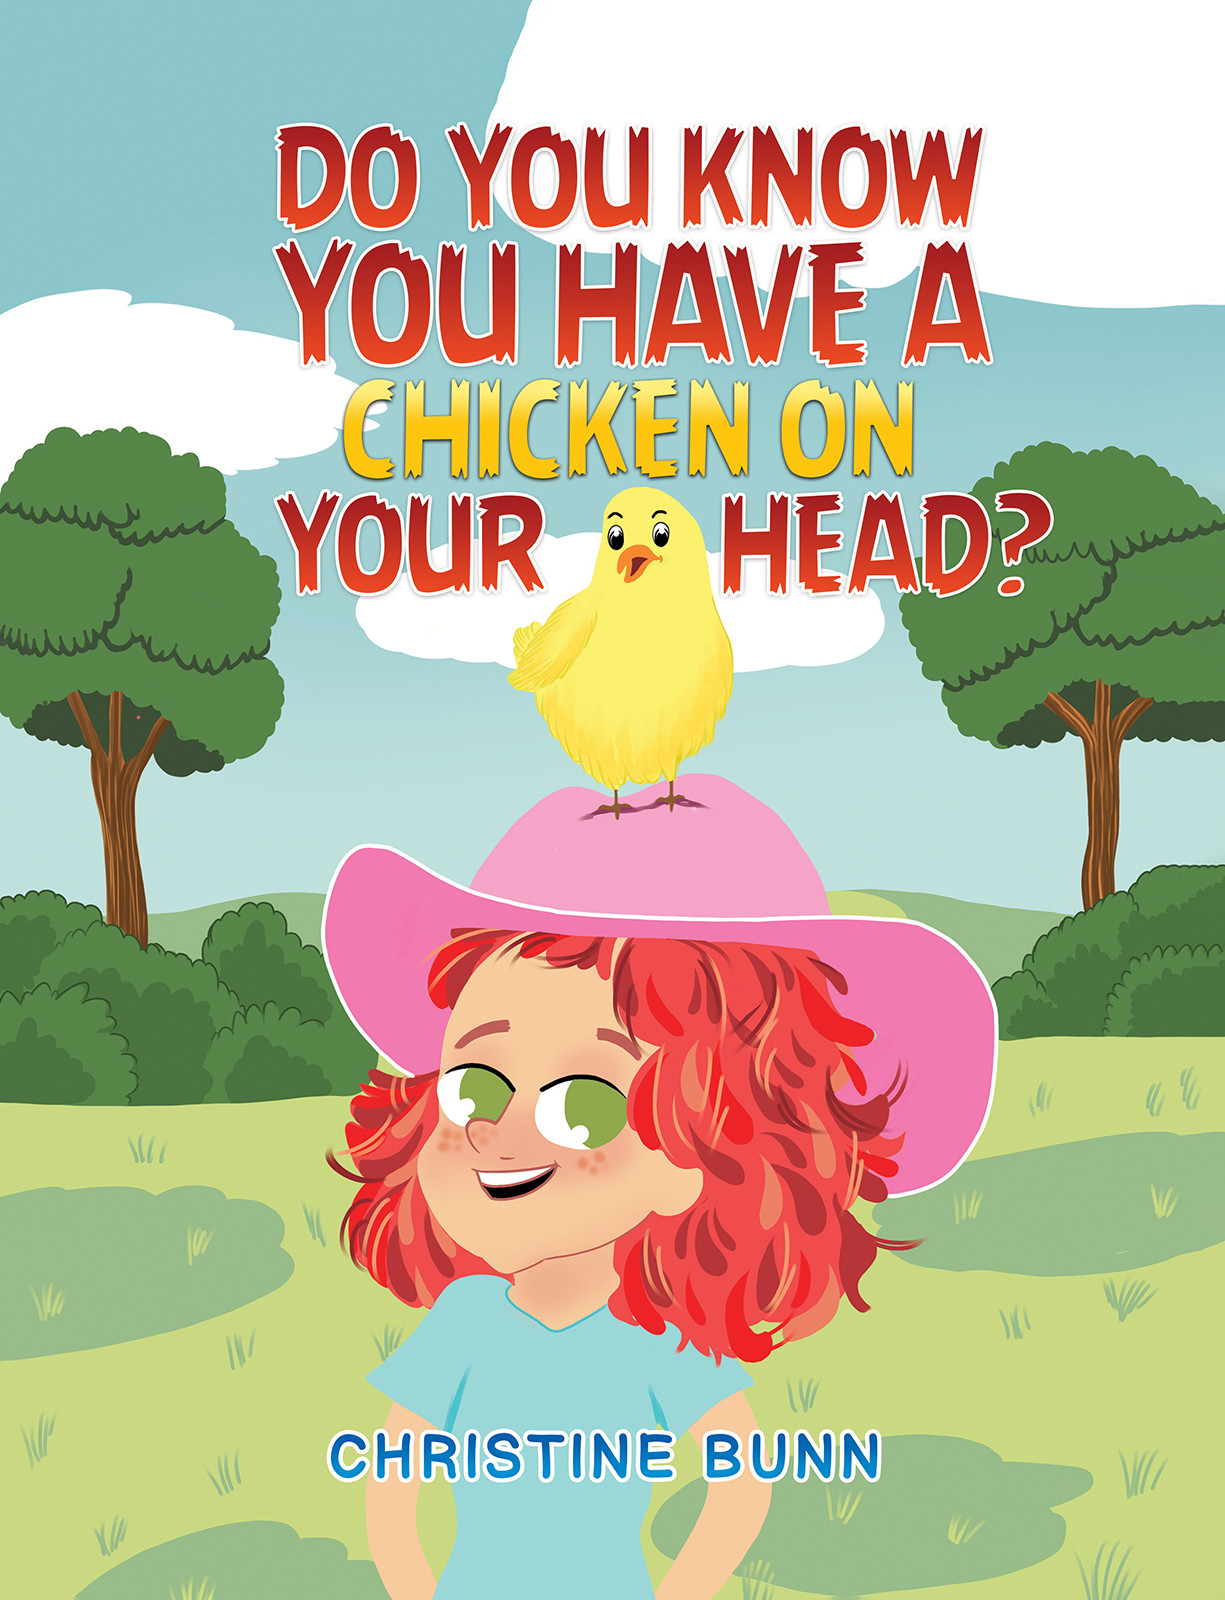 Do You Know You Have a Chicken on Your Head?